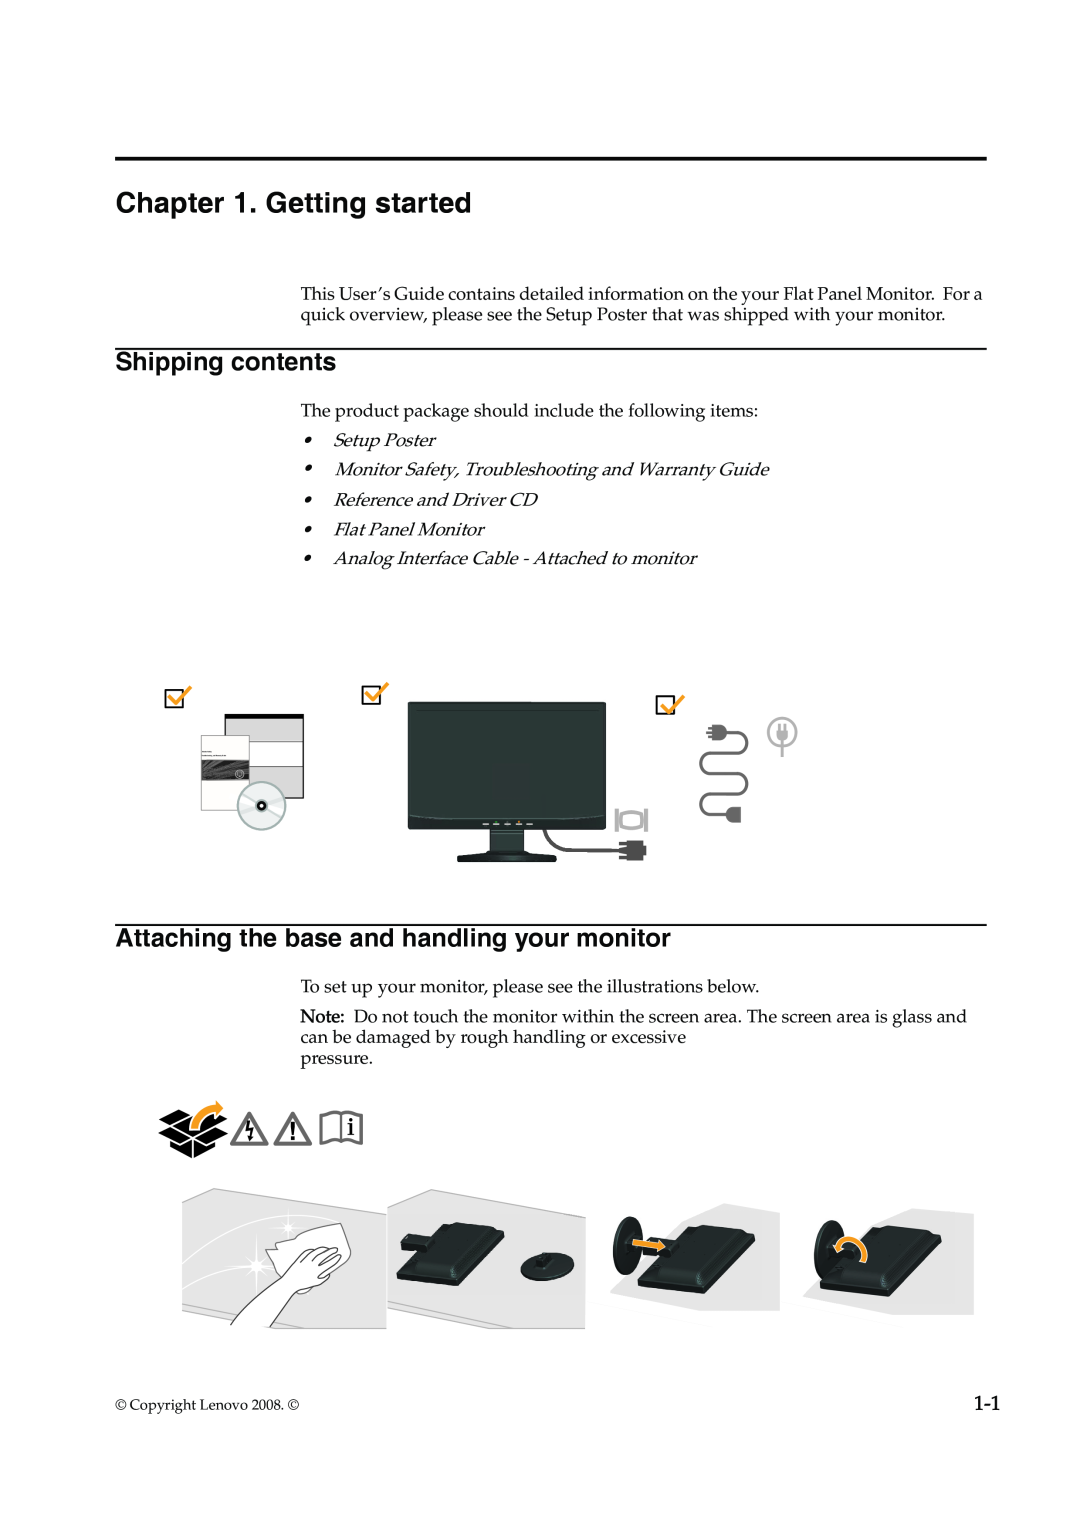 Lenovo 4415-AB1 manual Getting started, Shipping contents, Attaching the base and handling your monitor 